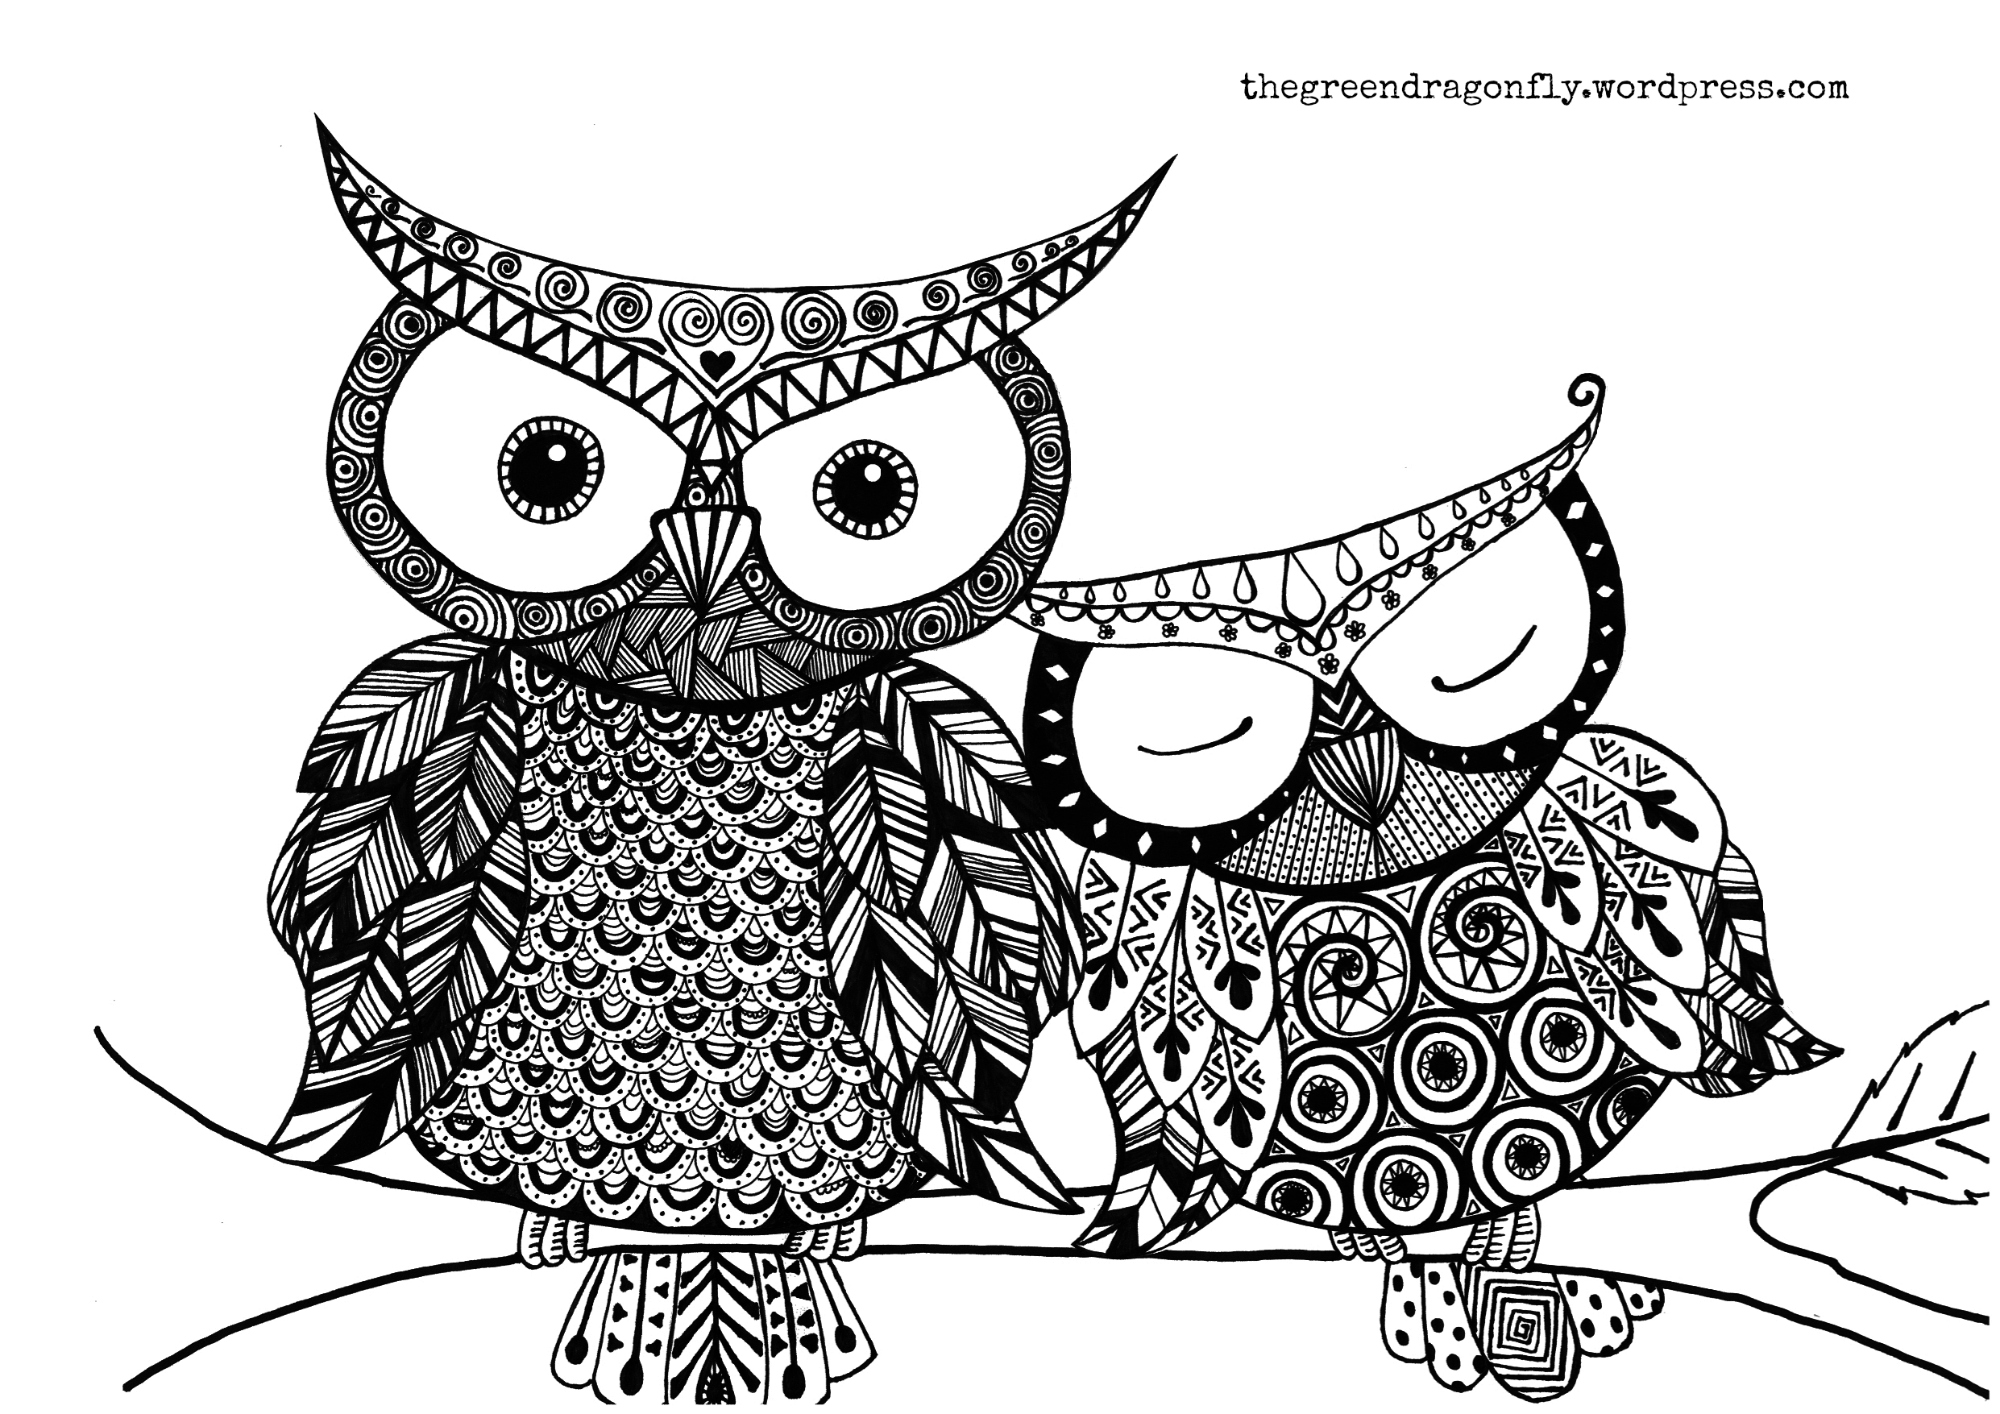 Owl coloring page â the green dragonfly